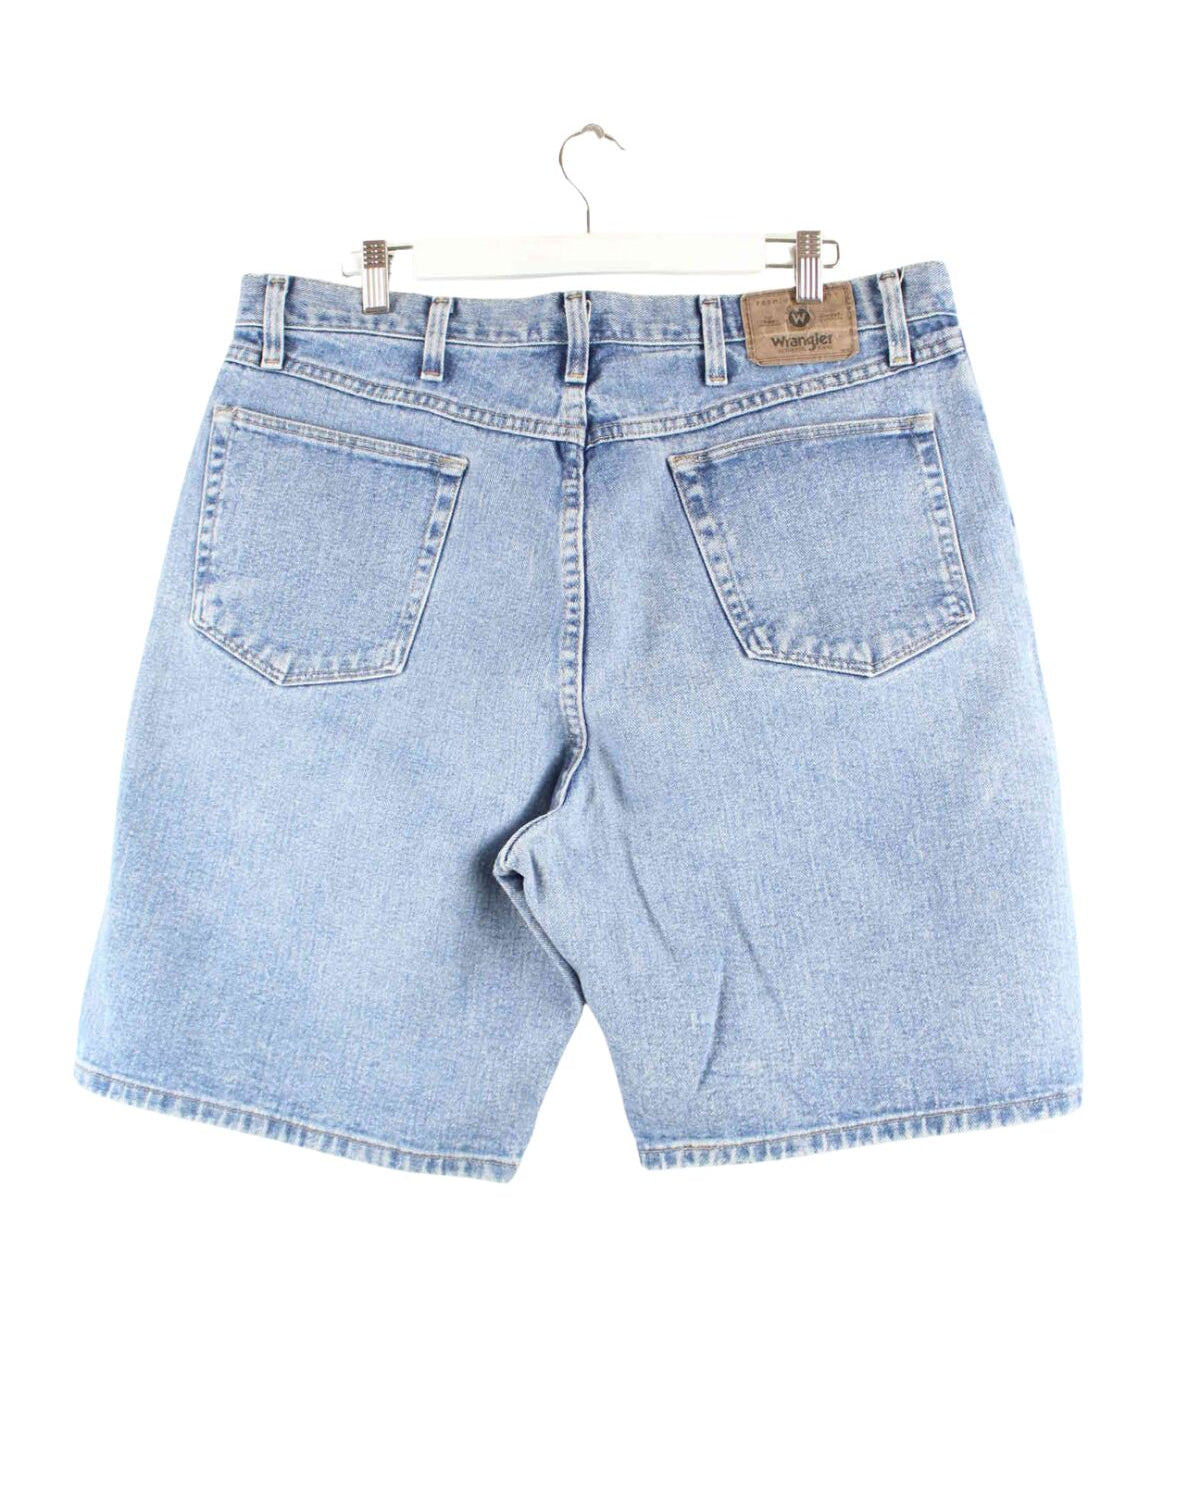 Wrangler Relaxed Fit Jeans Shorts Blau W38 (back image)